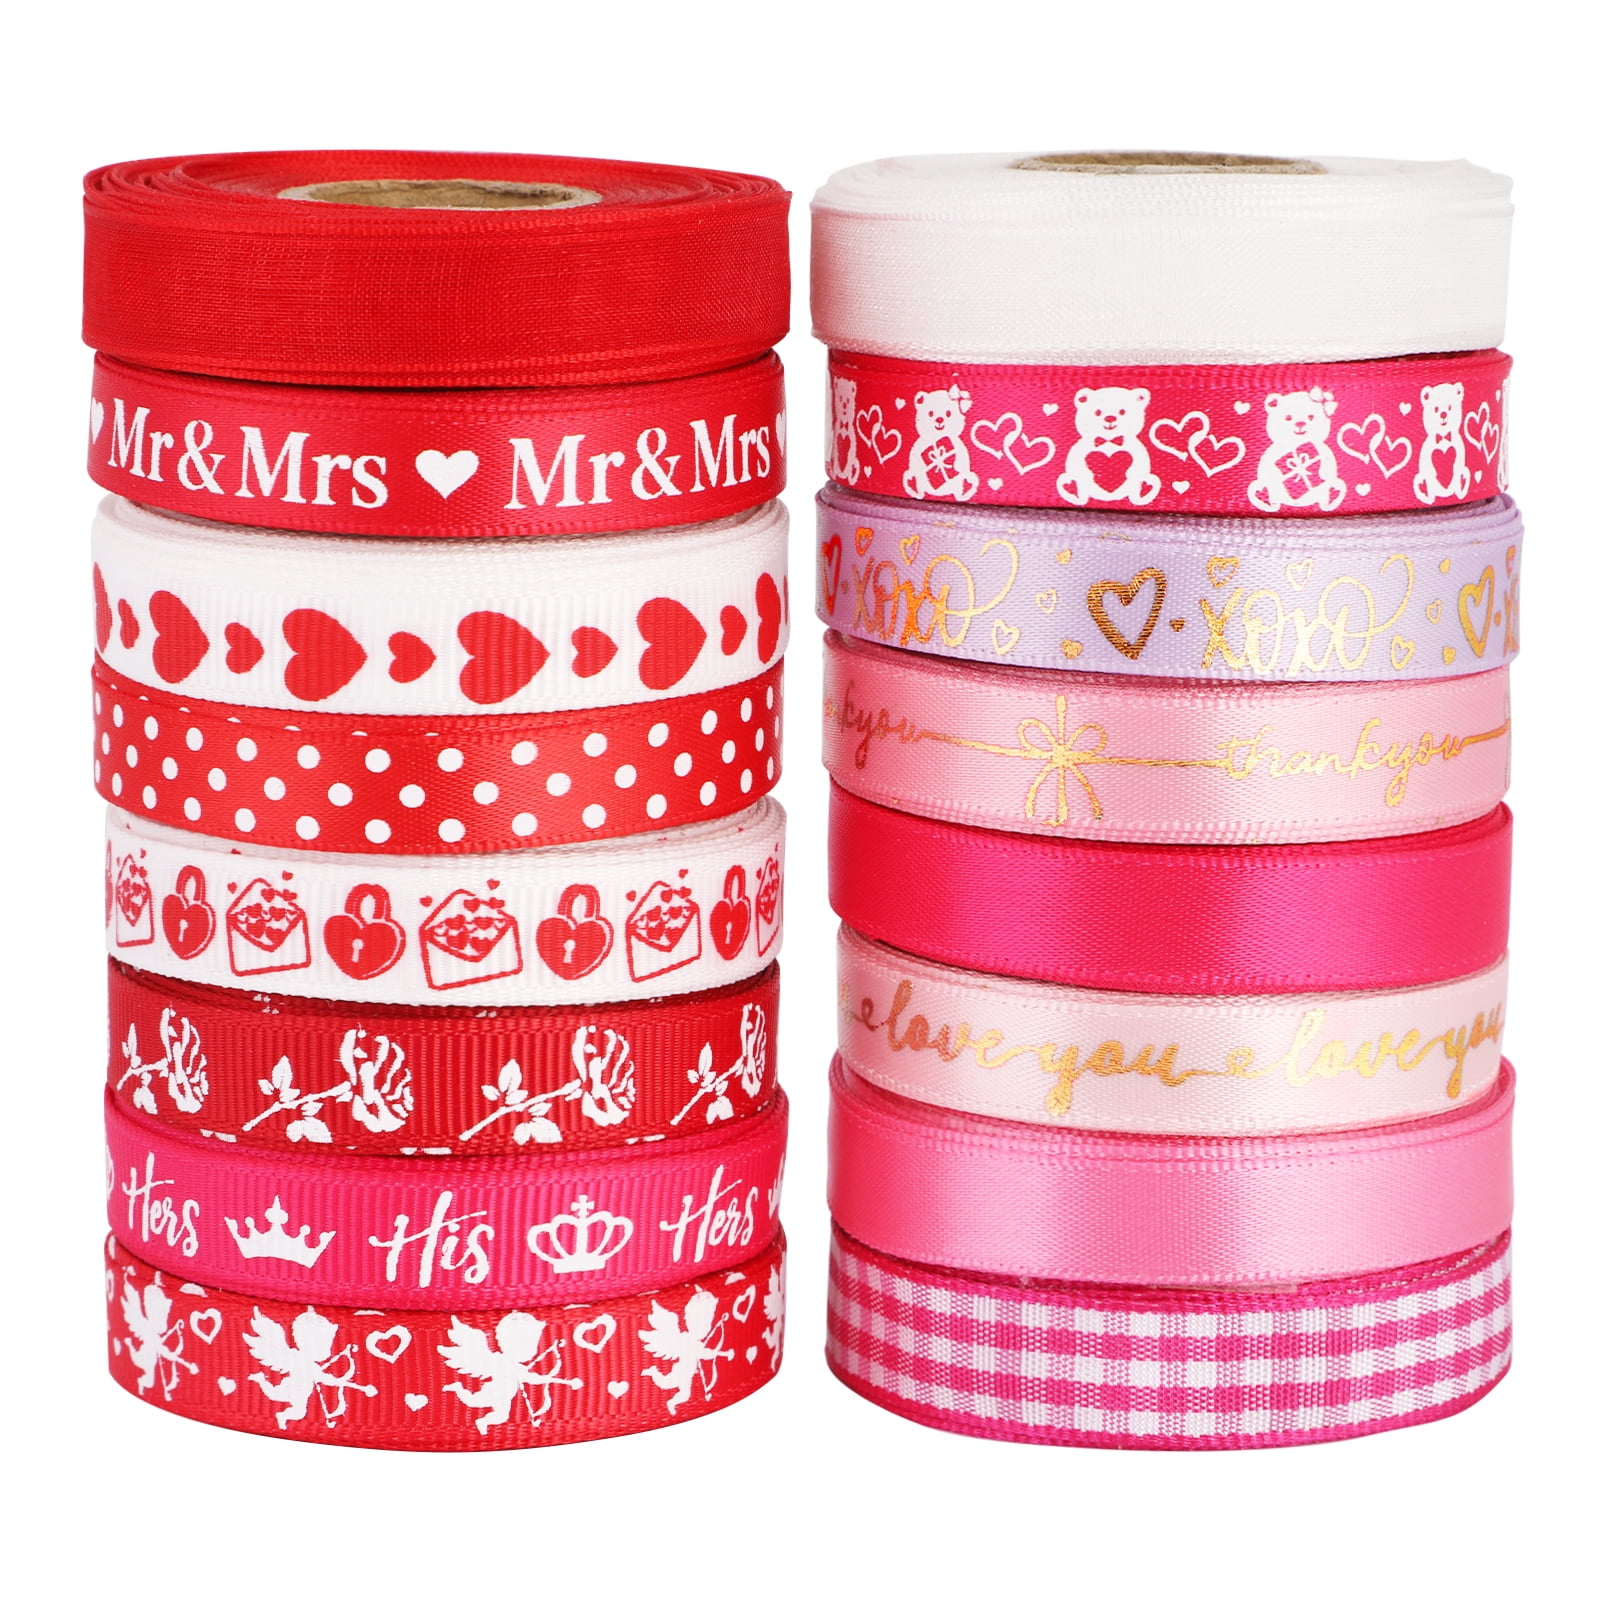  KatchOn, Grosgrain Valentine Ribbon Wired Roll - 30 Yards, Red and White Valentines Day Ribbon, White Valentines Ribbons for Crafts